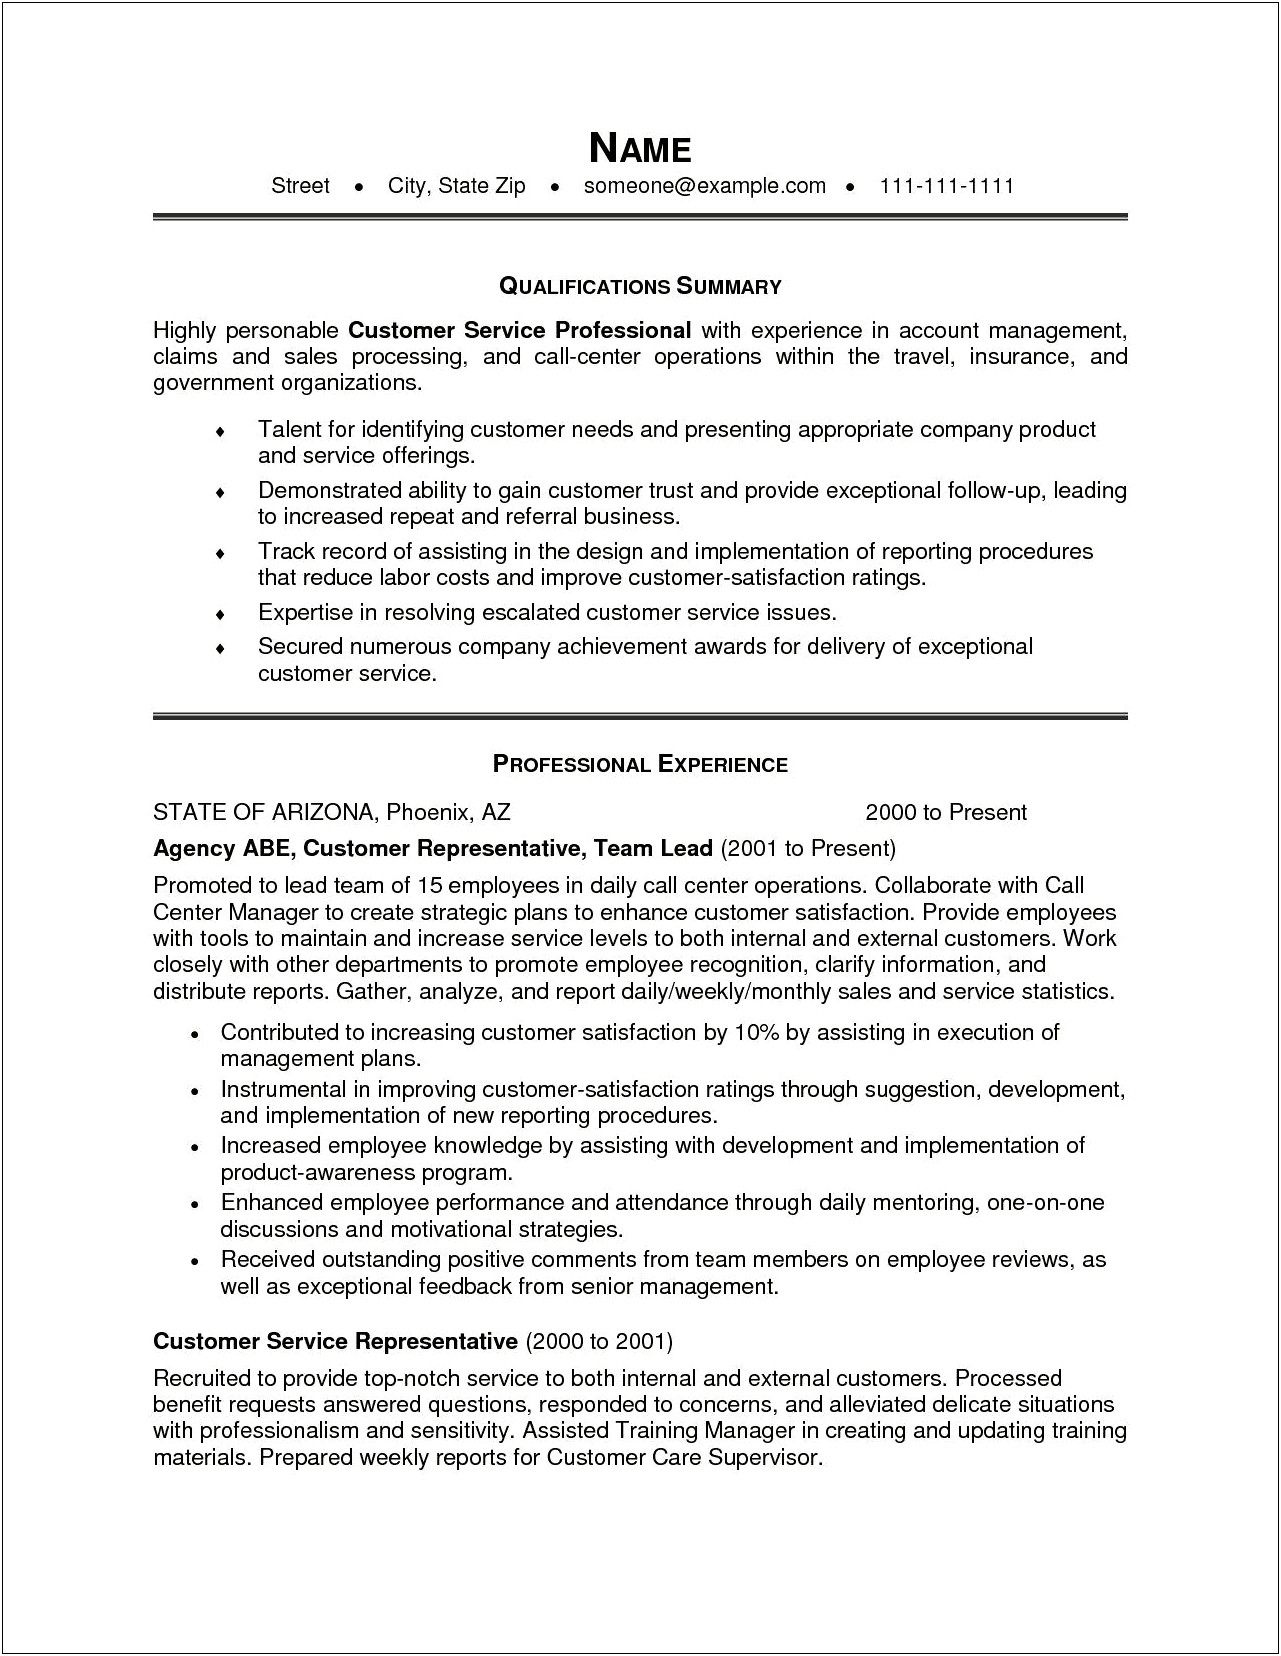 Example Of Resume With Summary Statement